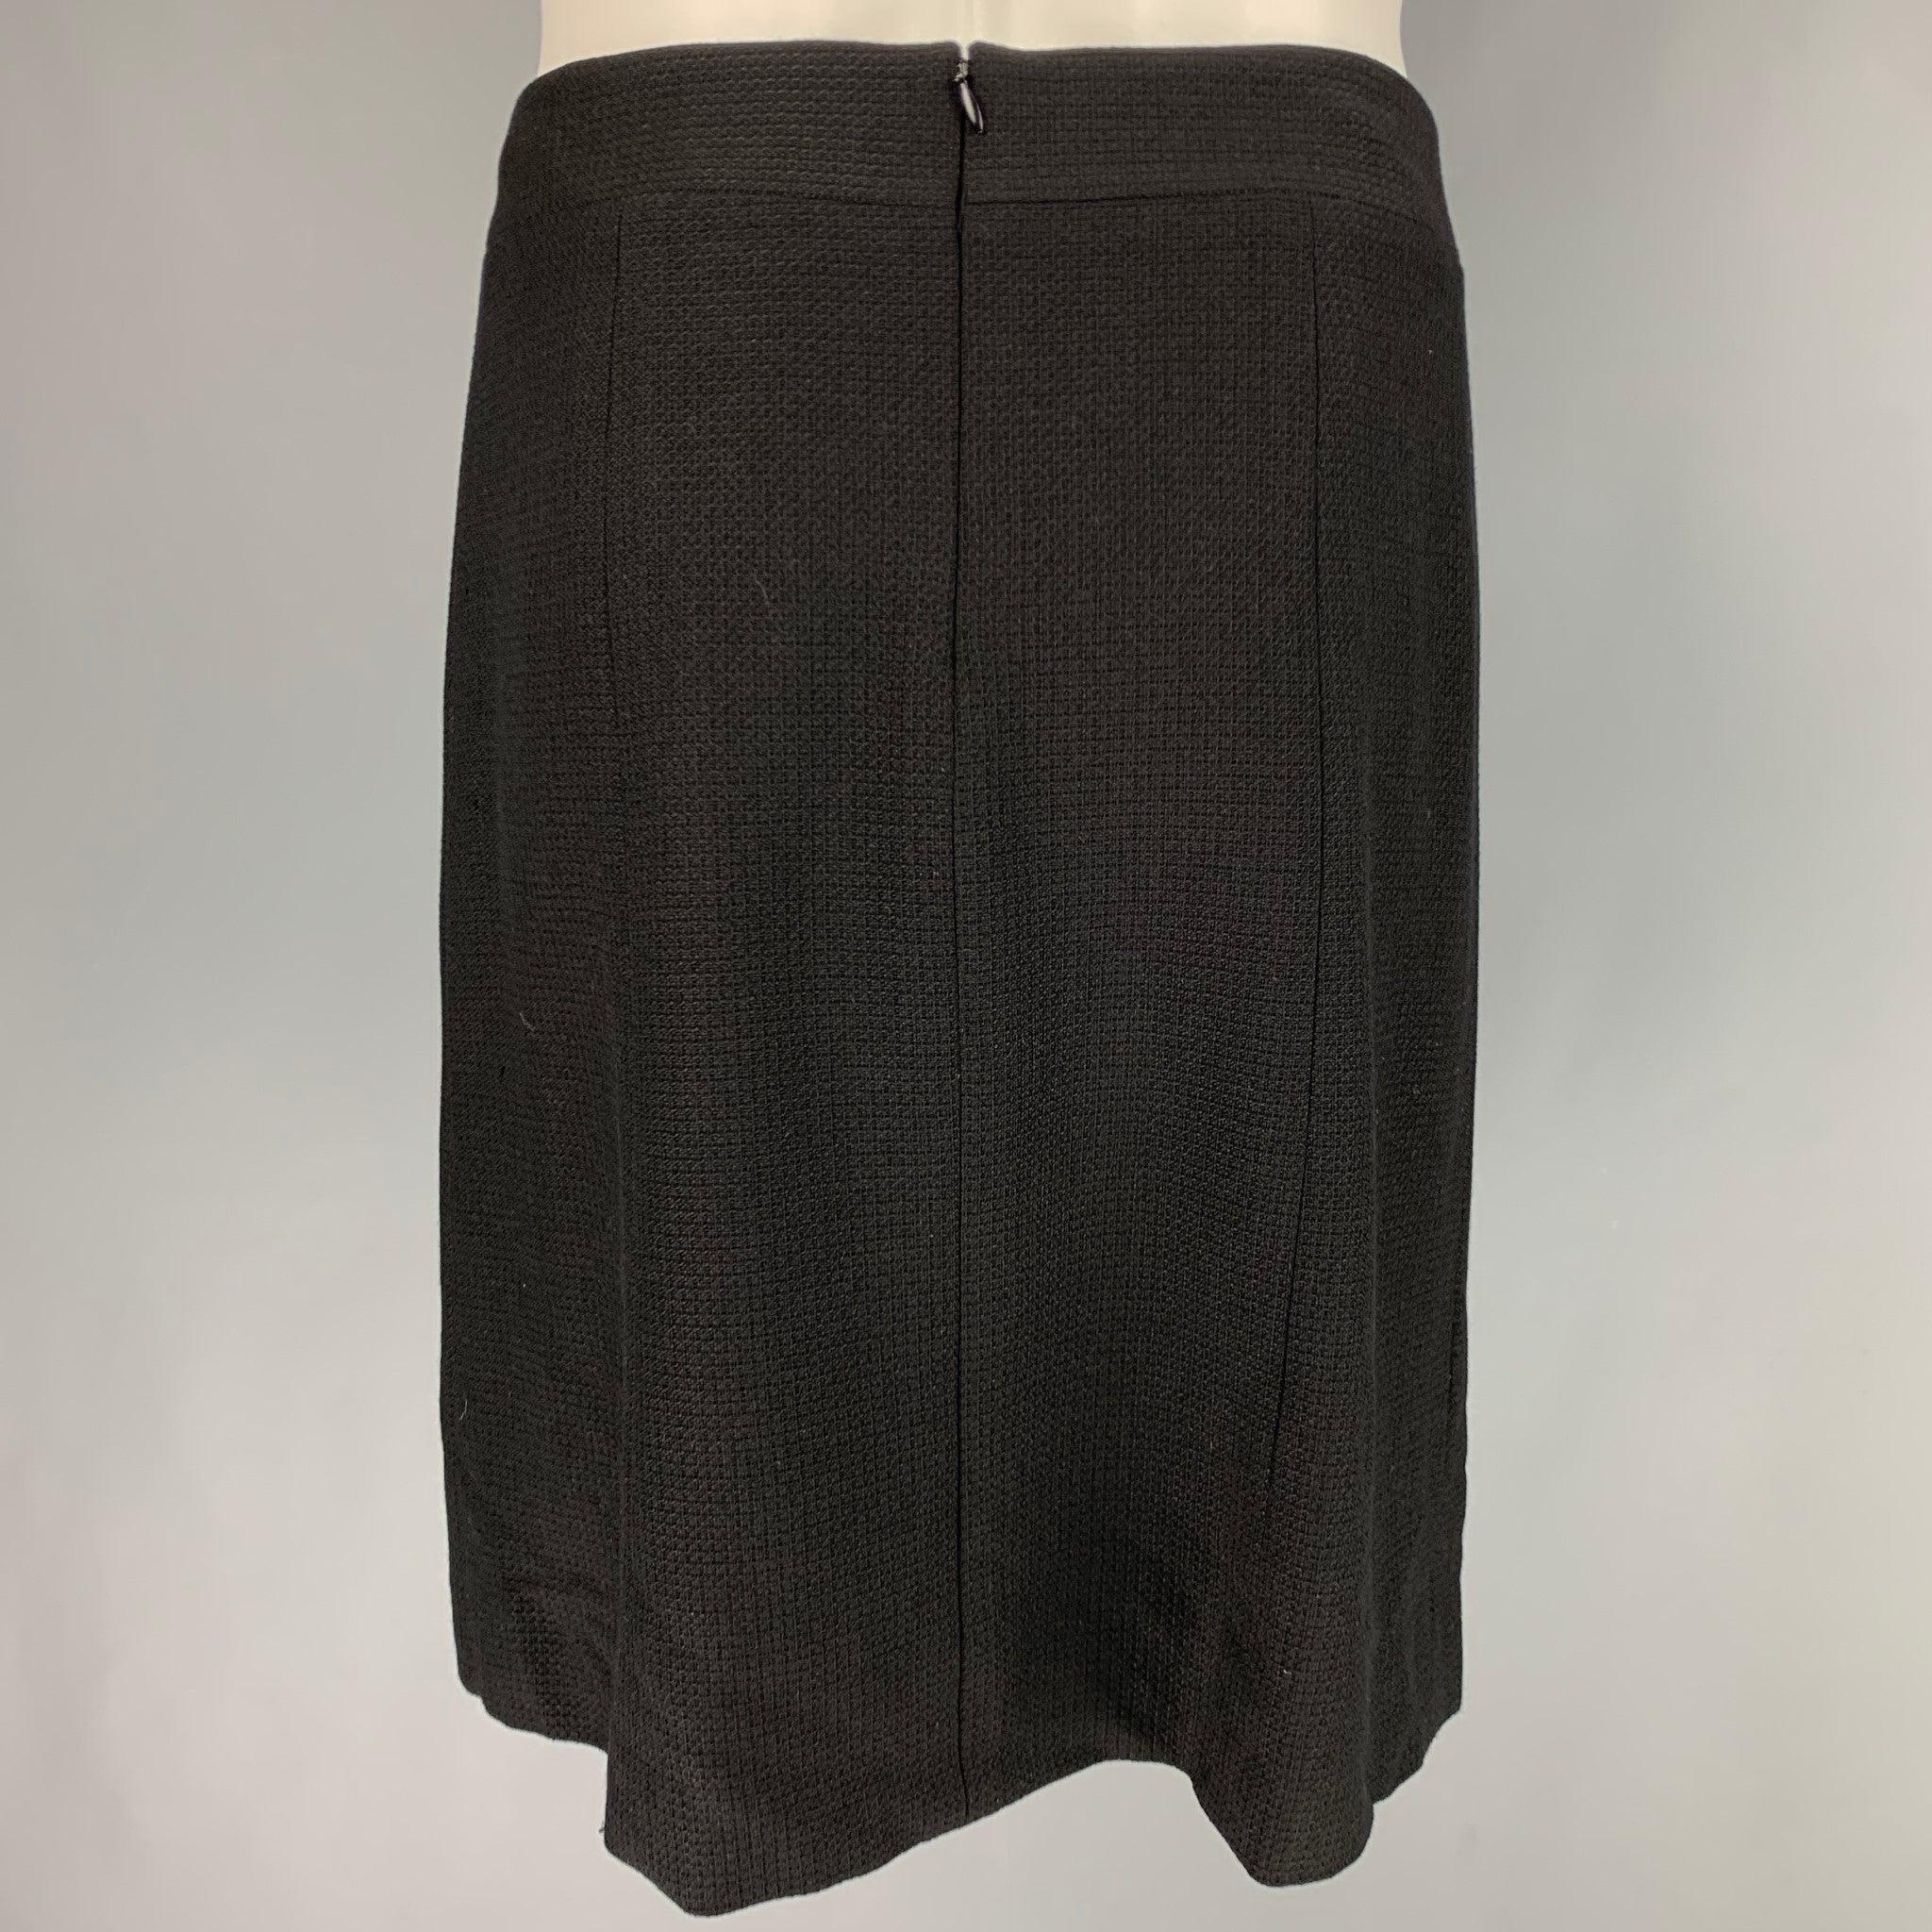 CHANEL Size 8 Black Wool Blend Textured Skirt In Good Condition For Sale In San Francisco, CA